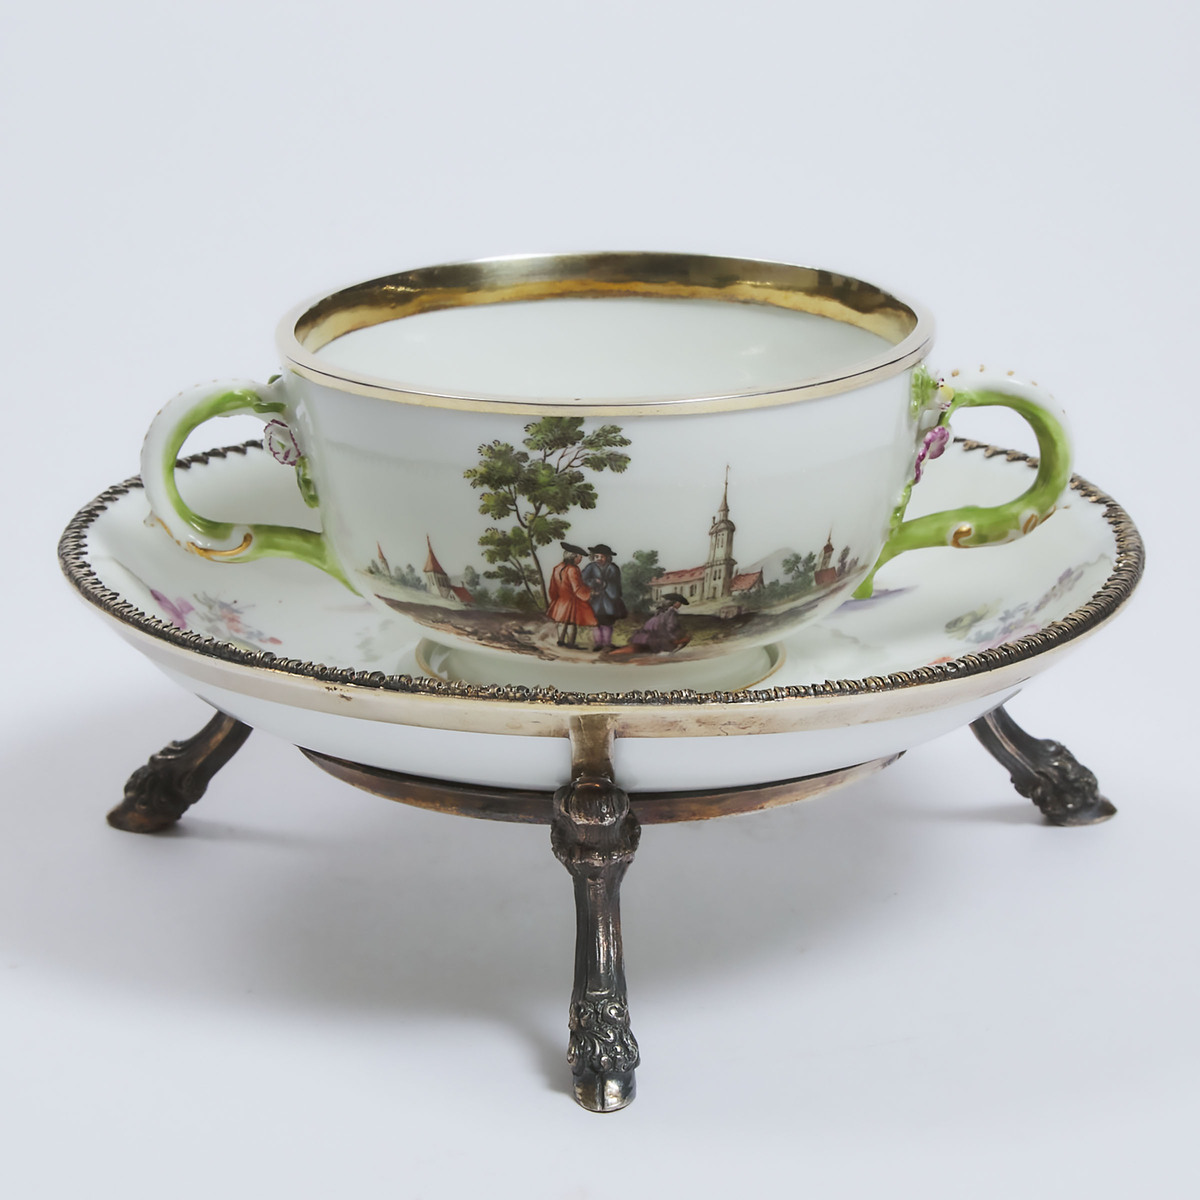 Meissen Silver Mounted Ecuelle and Stand, c.1750, stand diameter 7.1 in — 18 cm; overall height 4 in